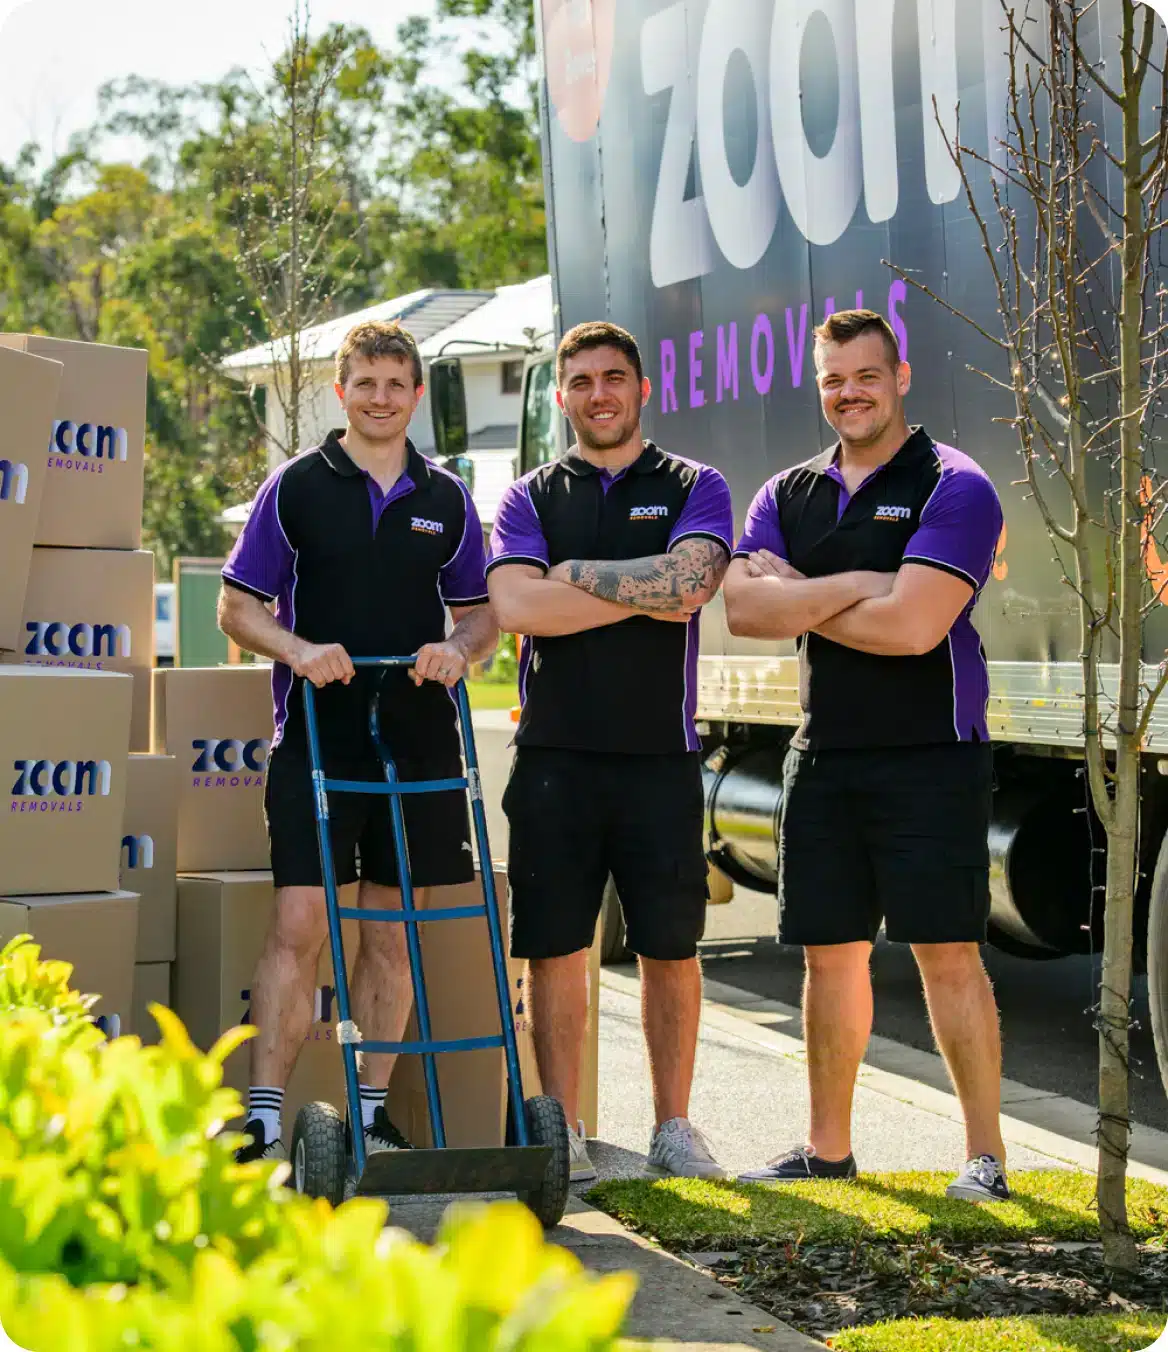 ZOOM Removals Movers in Sydney